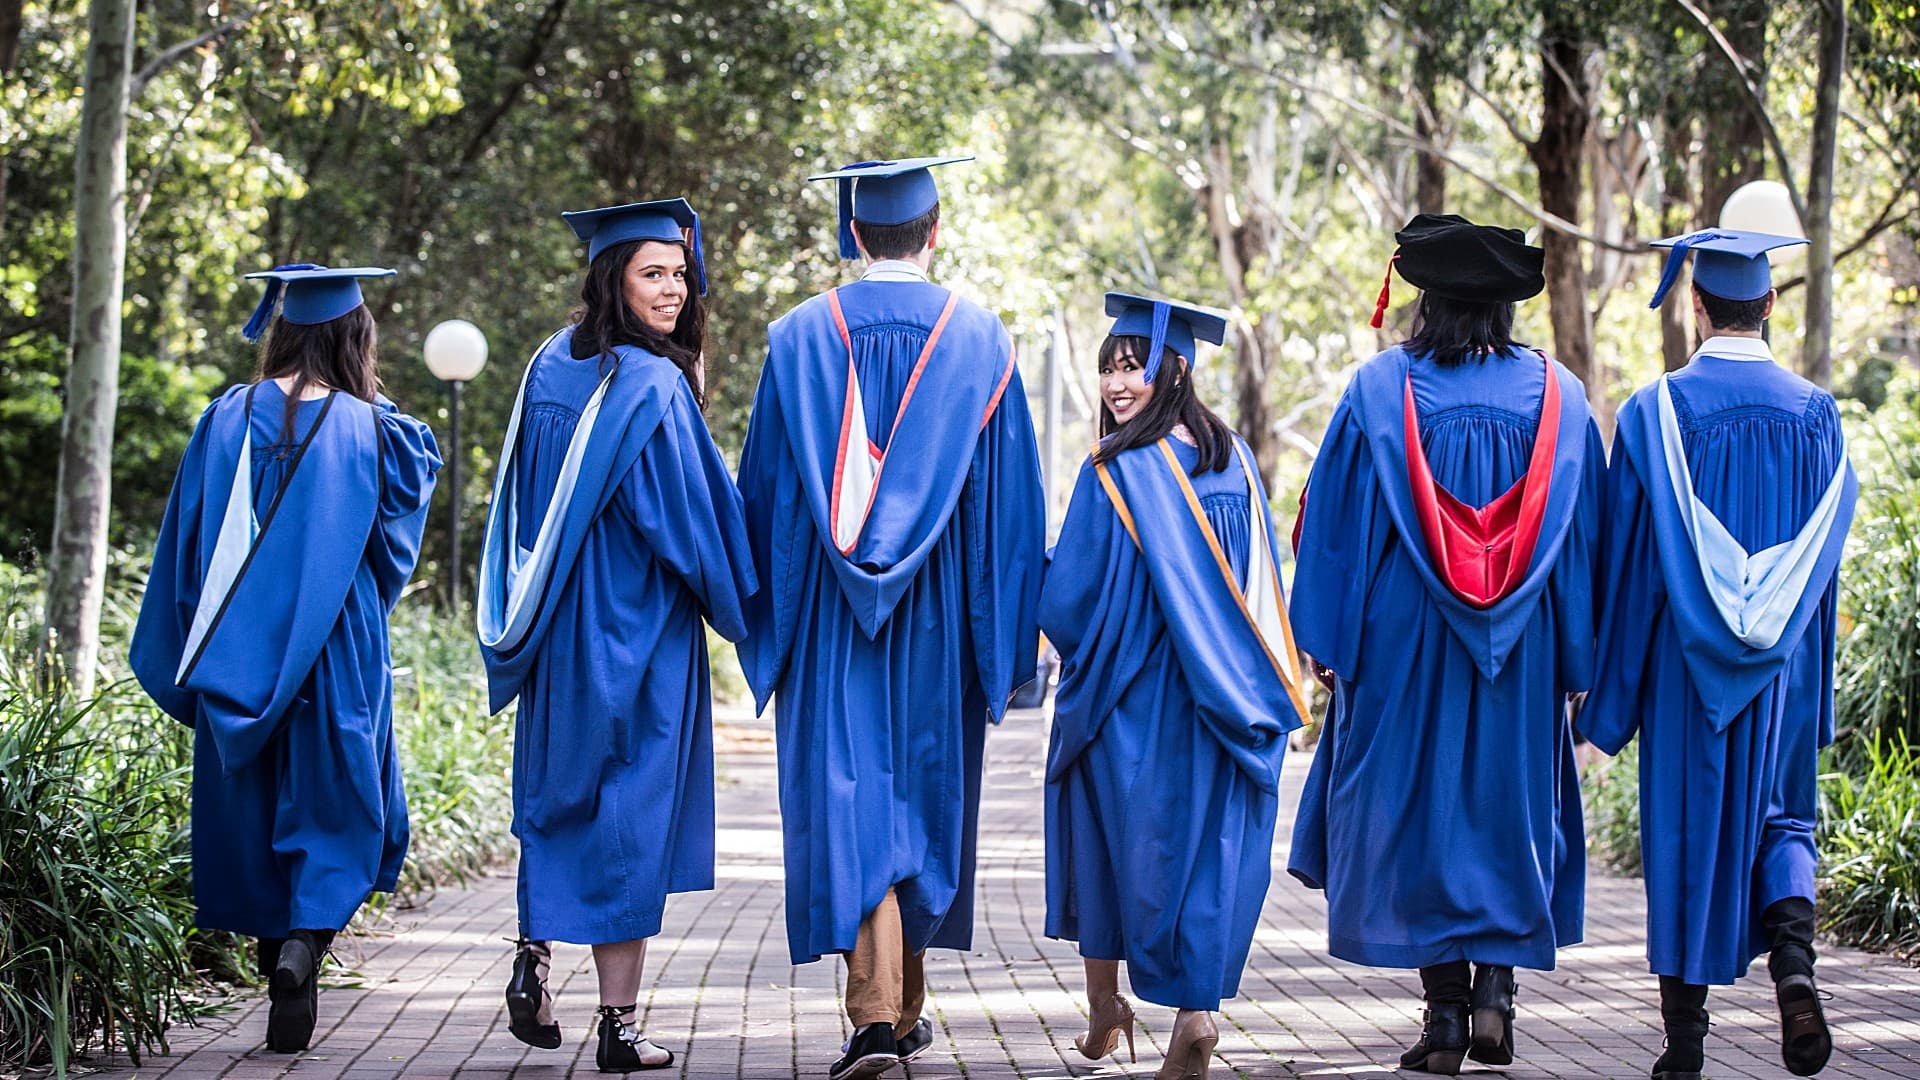 UOW maintains its position in top 250 universities in the world